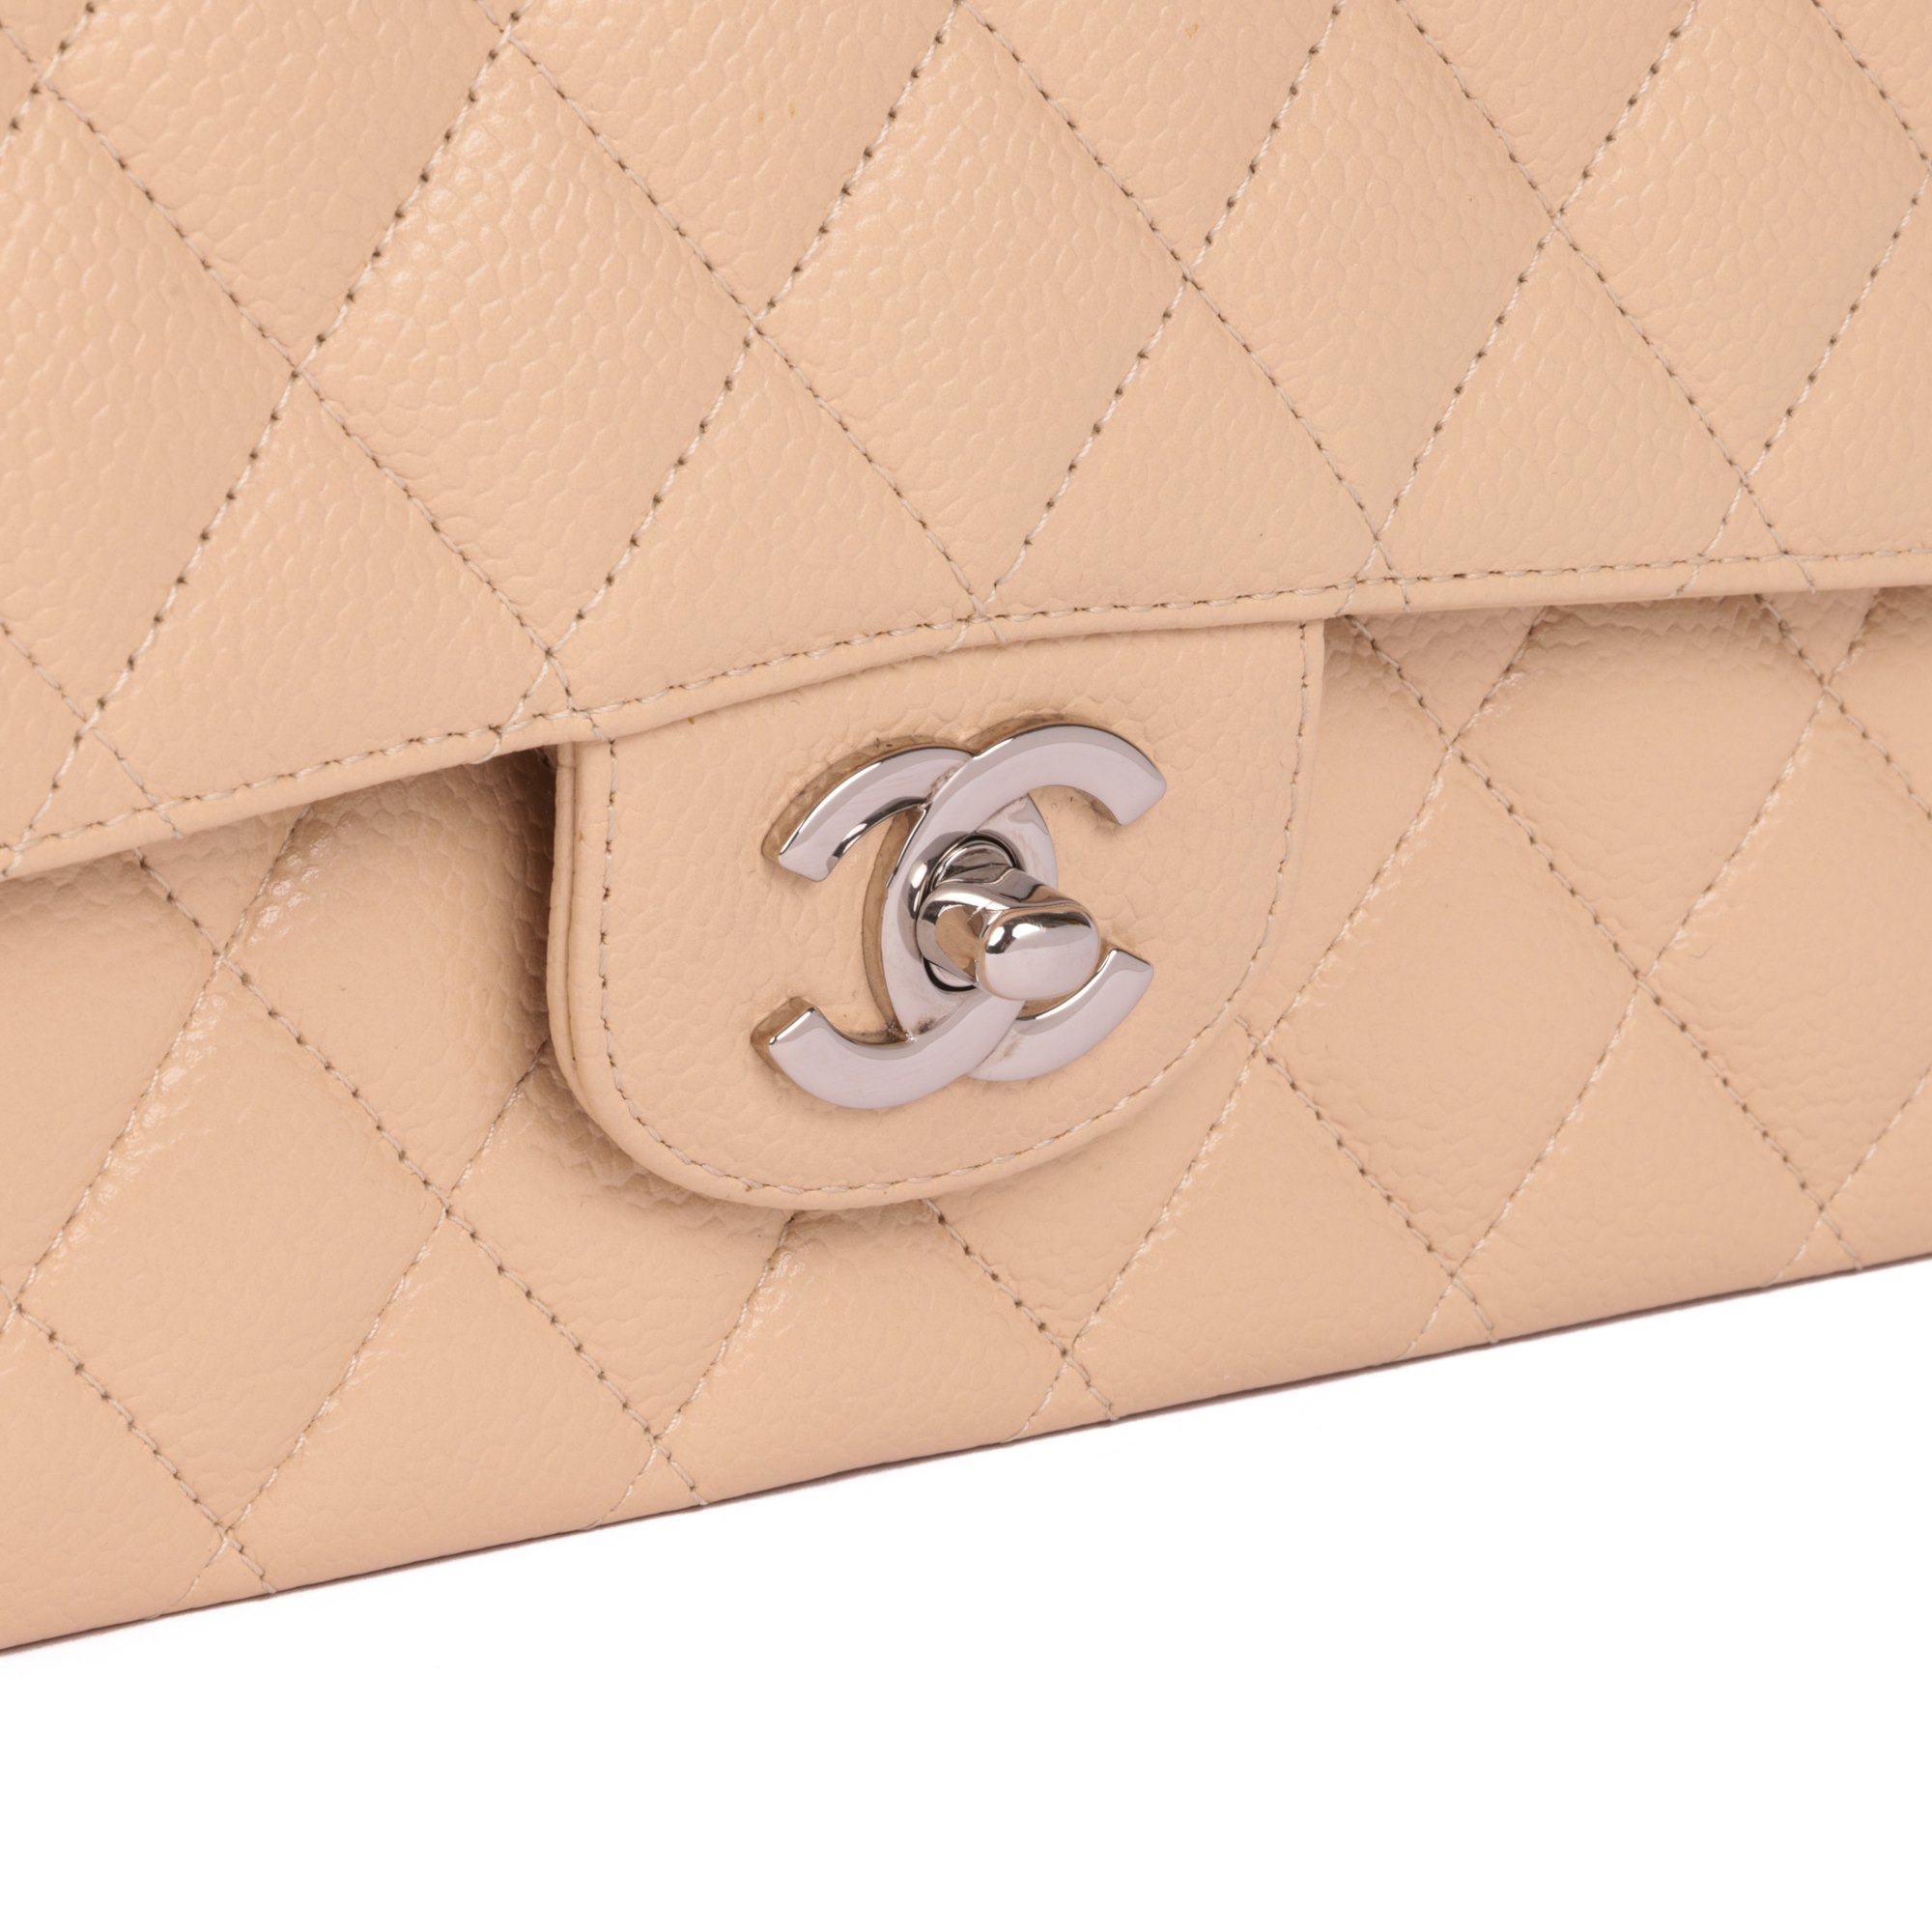 Chanel Beige Quilted Caviar Leather Medium Classic Double Flap Bag